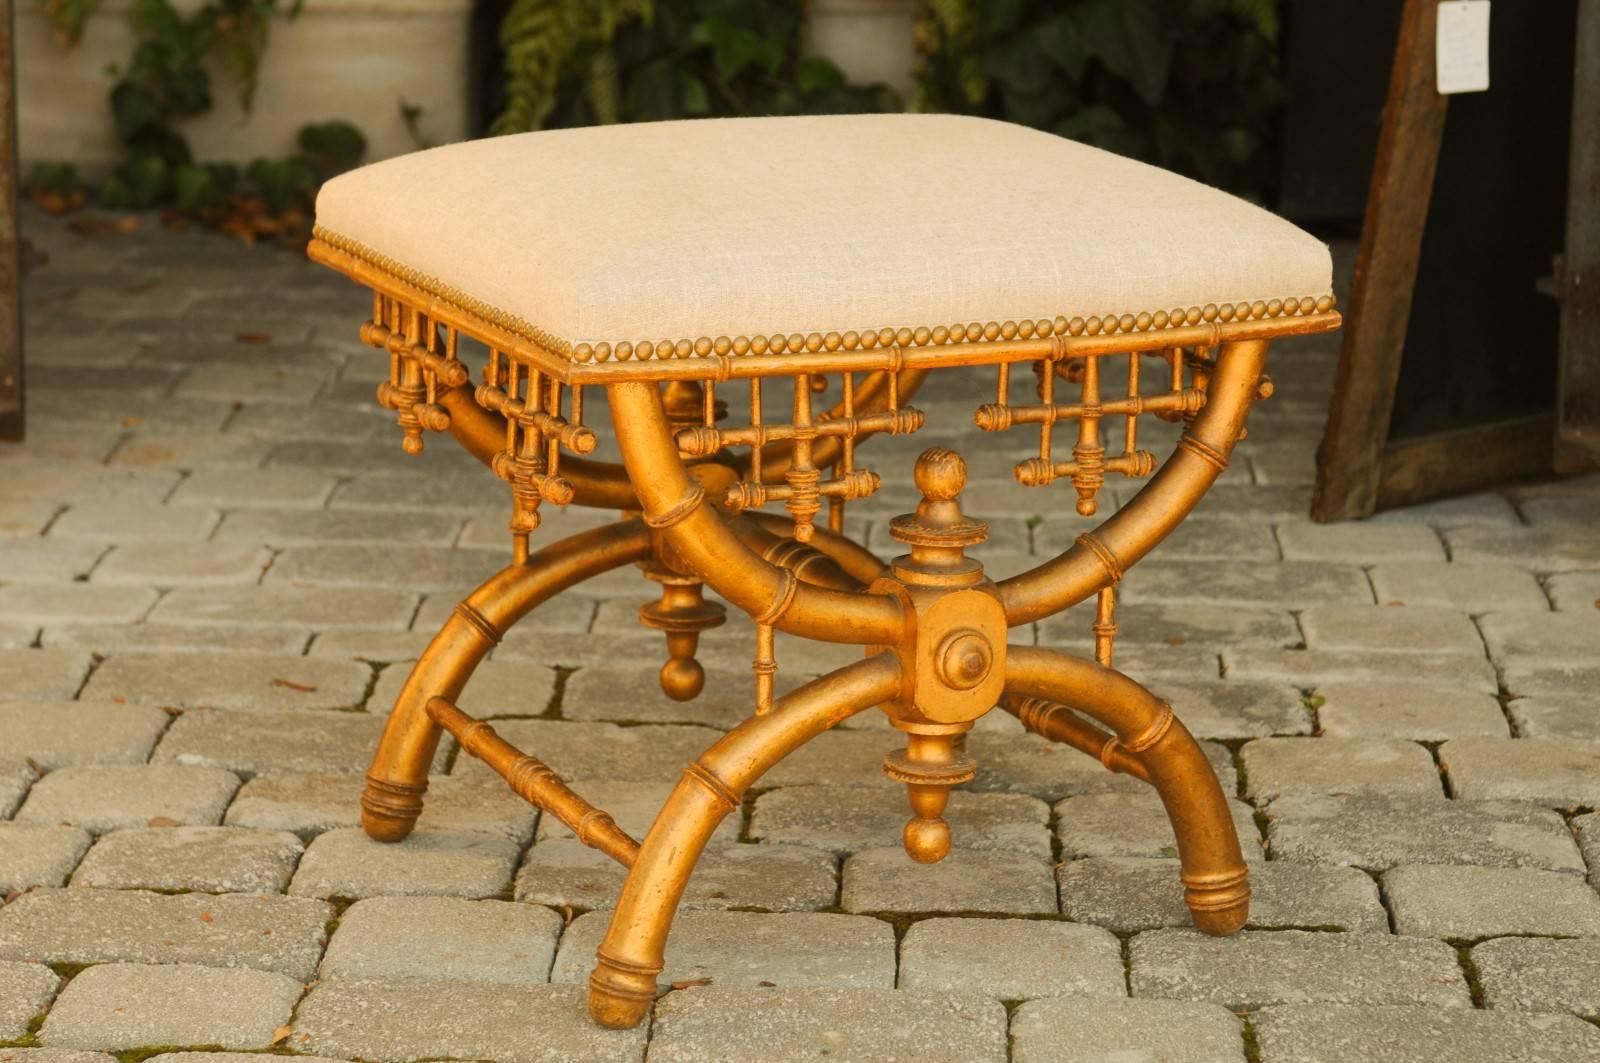 An English Brighton Pavilion style chinoiserie giltwood stool from the mid-20th century. This English stool features a Chinese Chippendale giltwood frame, made in the manner of Brighton Pavilion. The rectangular seat, covered in linen upholstery